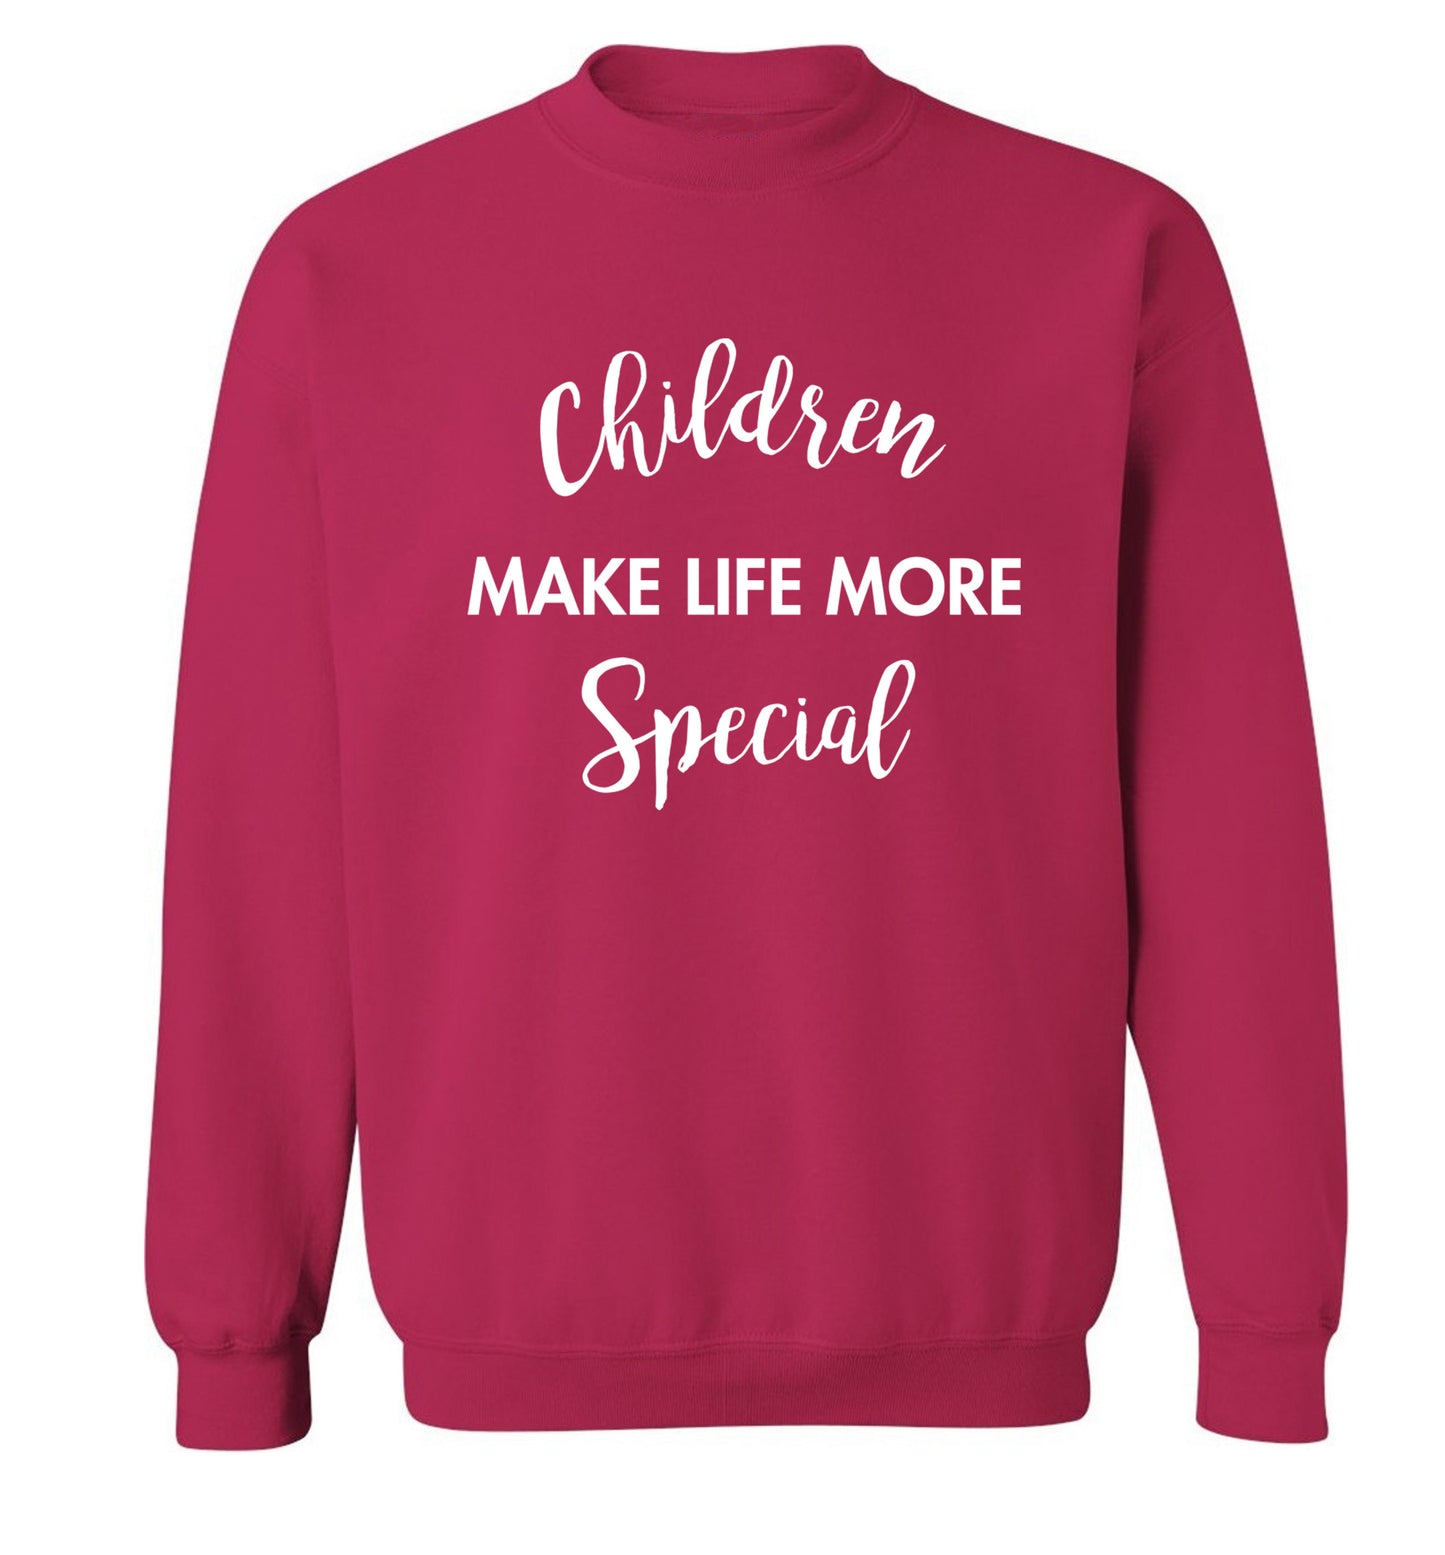 Children make life more special Adult's unisex pink Sweater 2XL